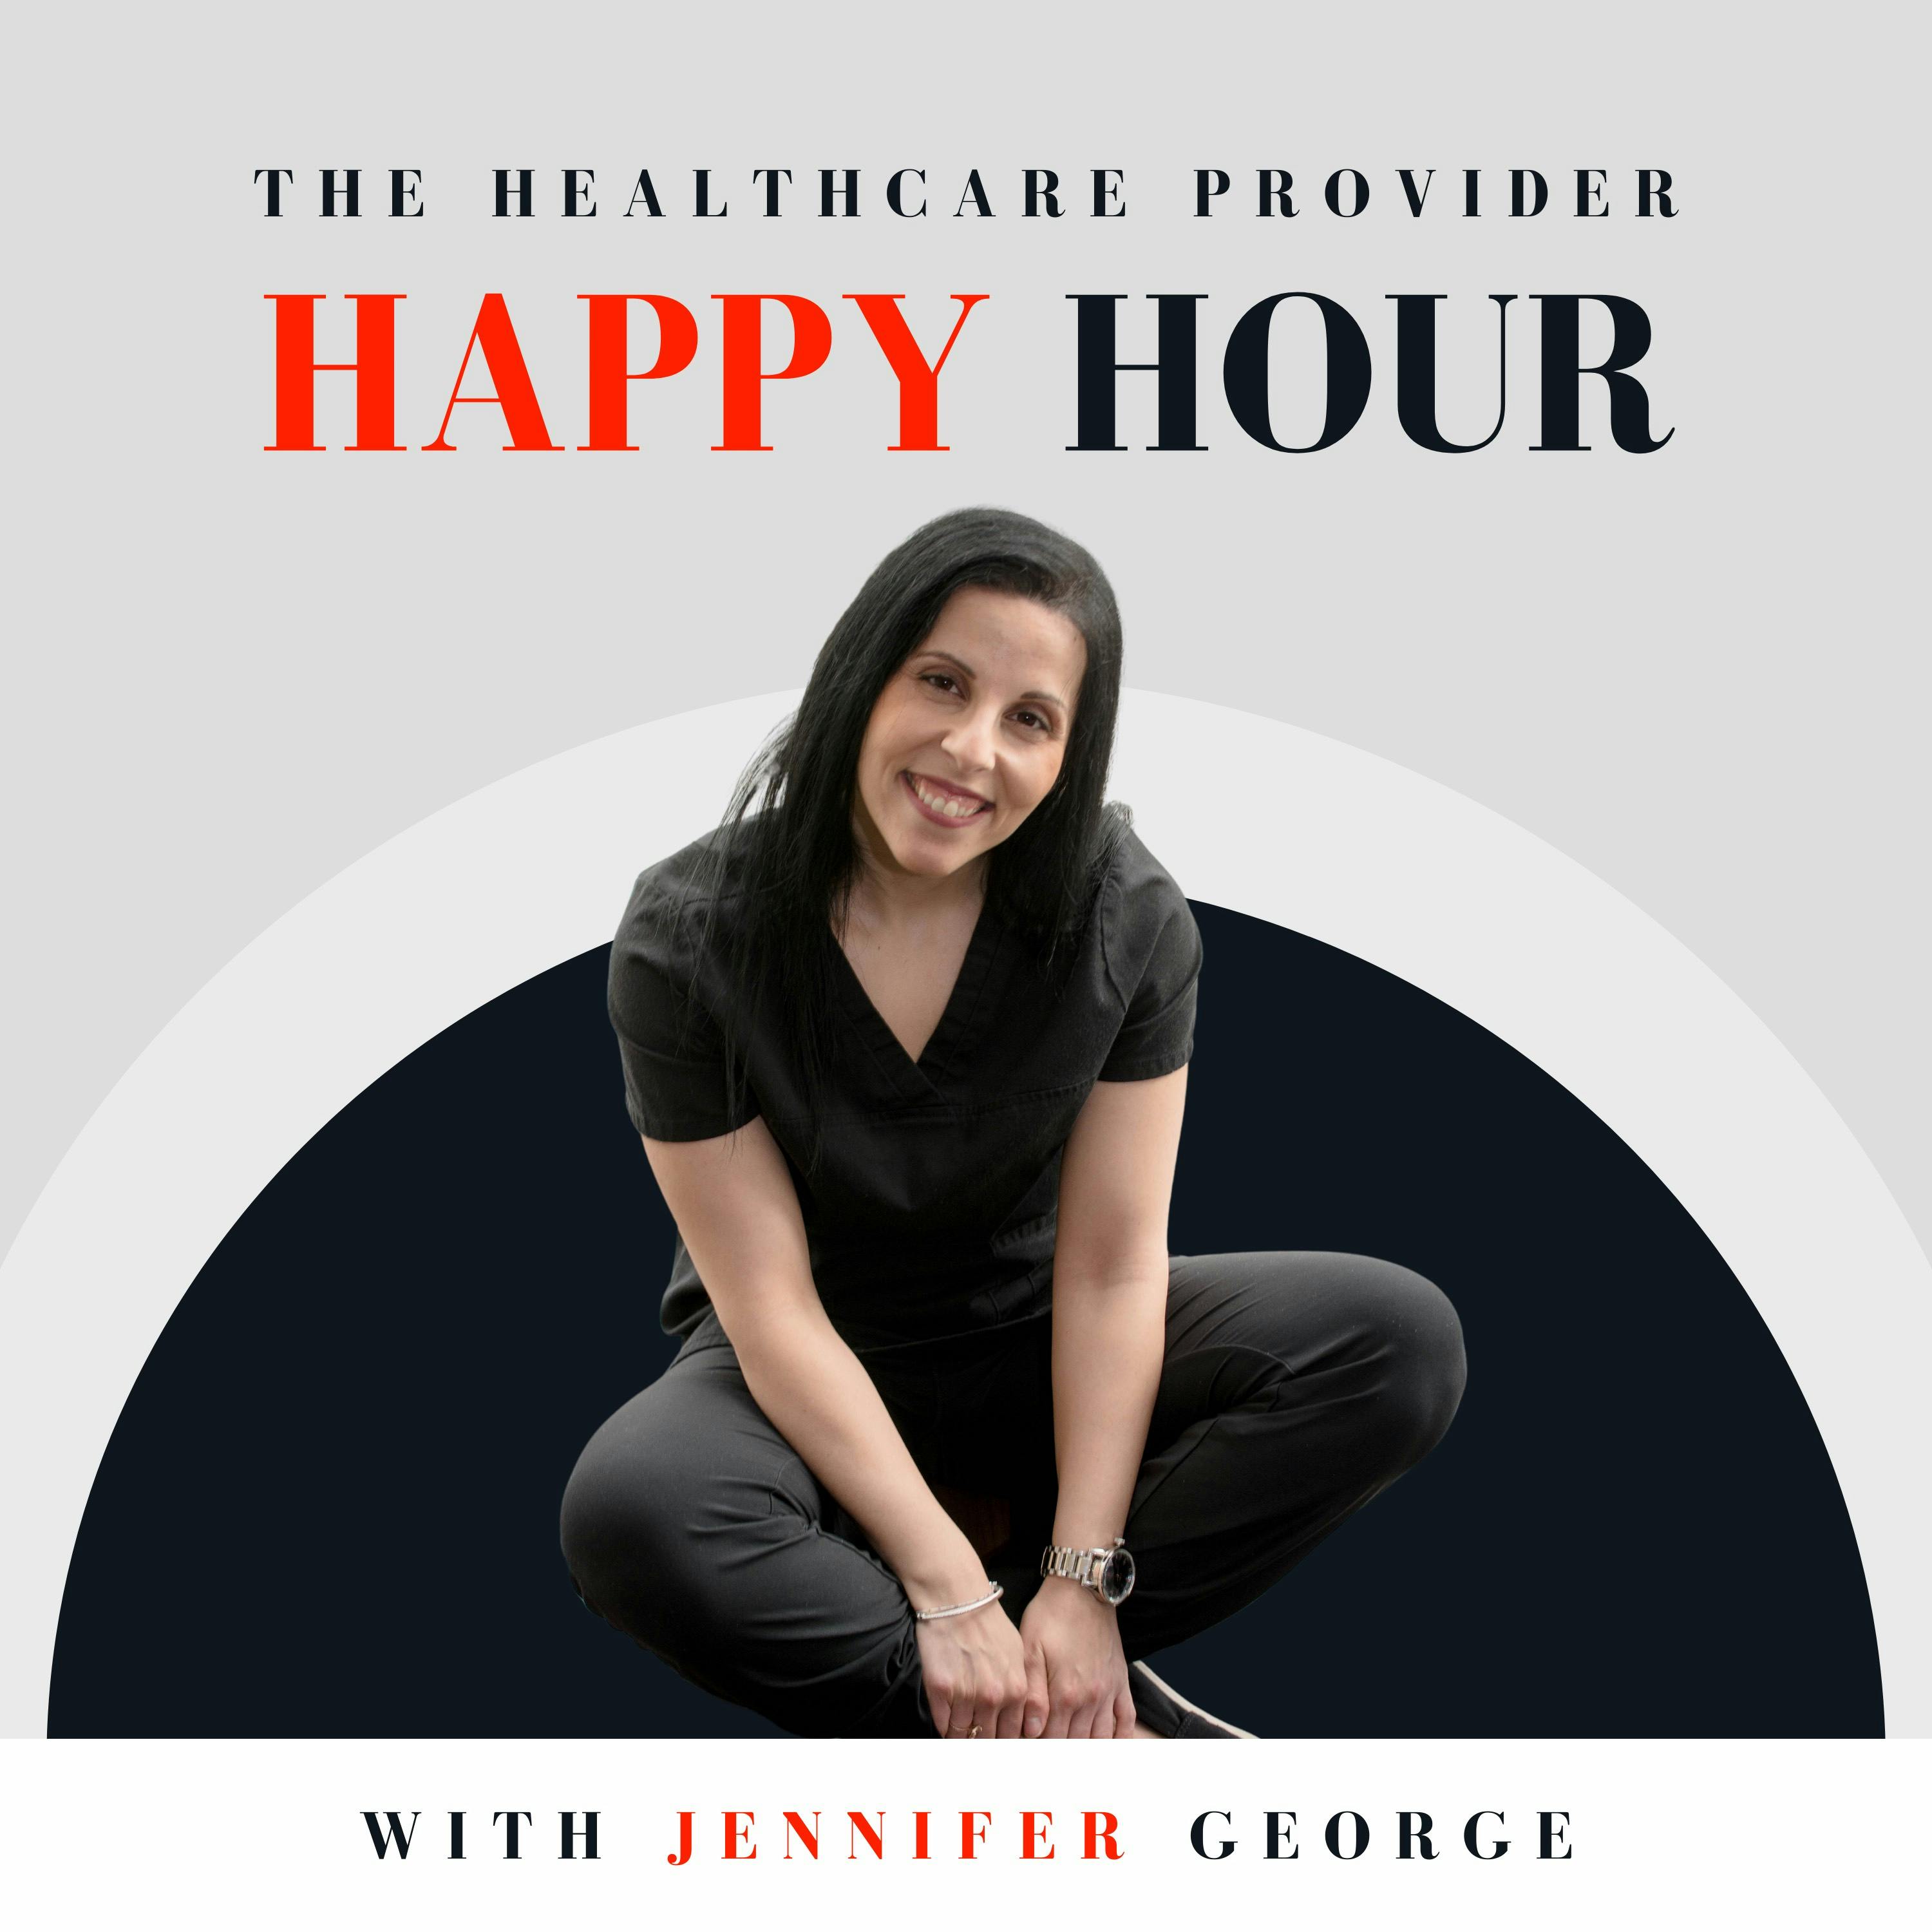 Why Women Are Burning Out in Healthcare & How We Can Change This